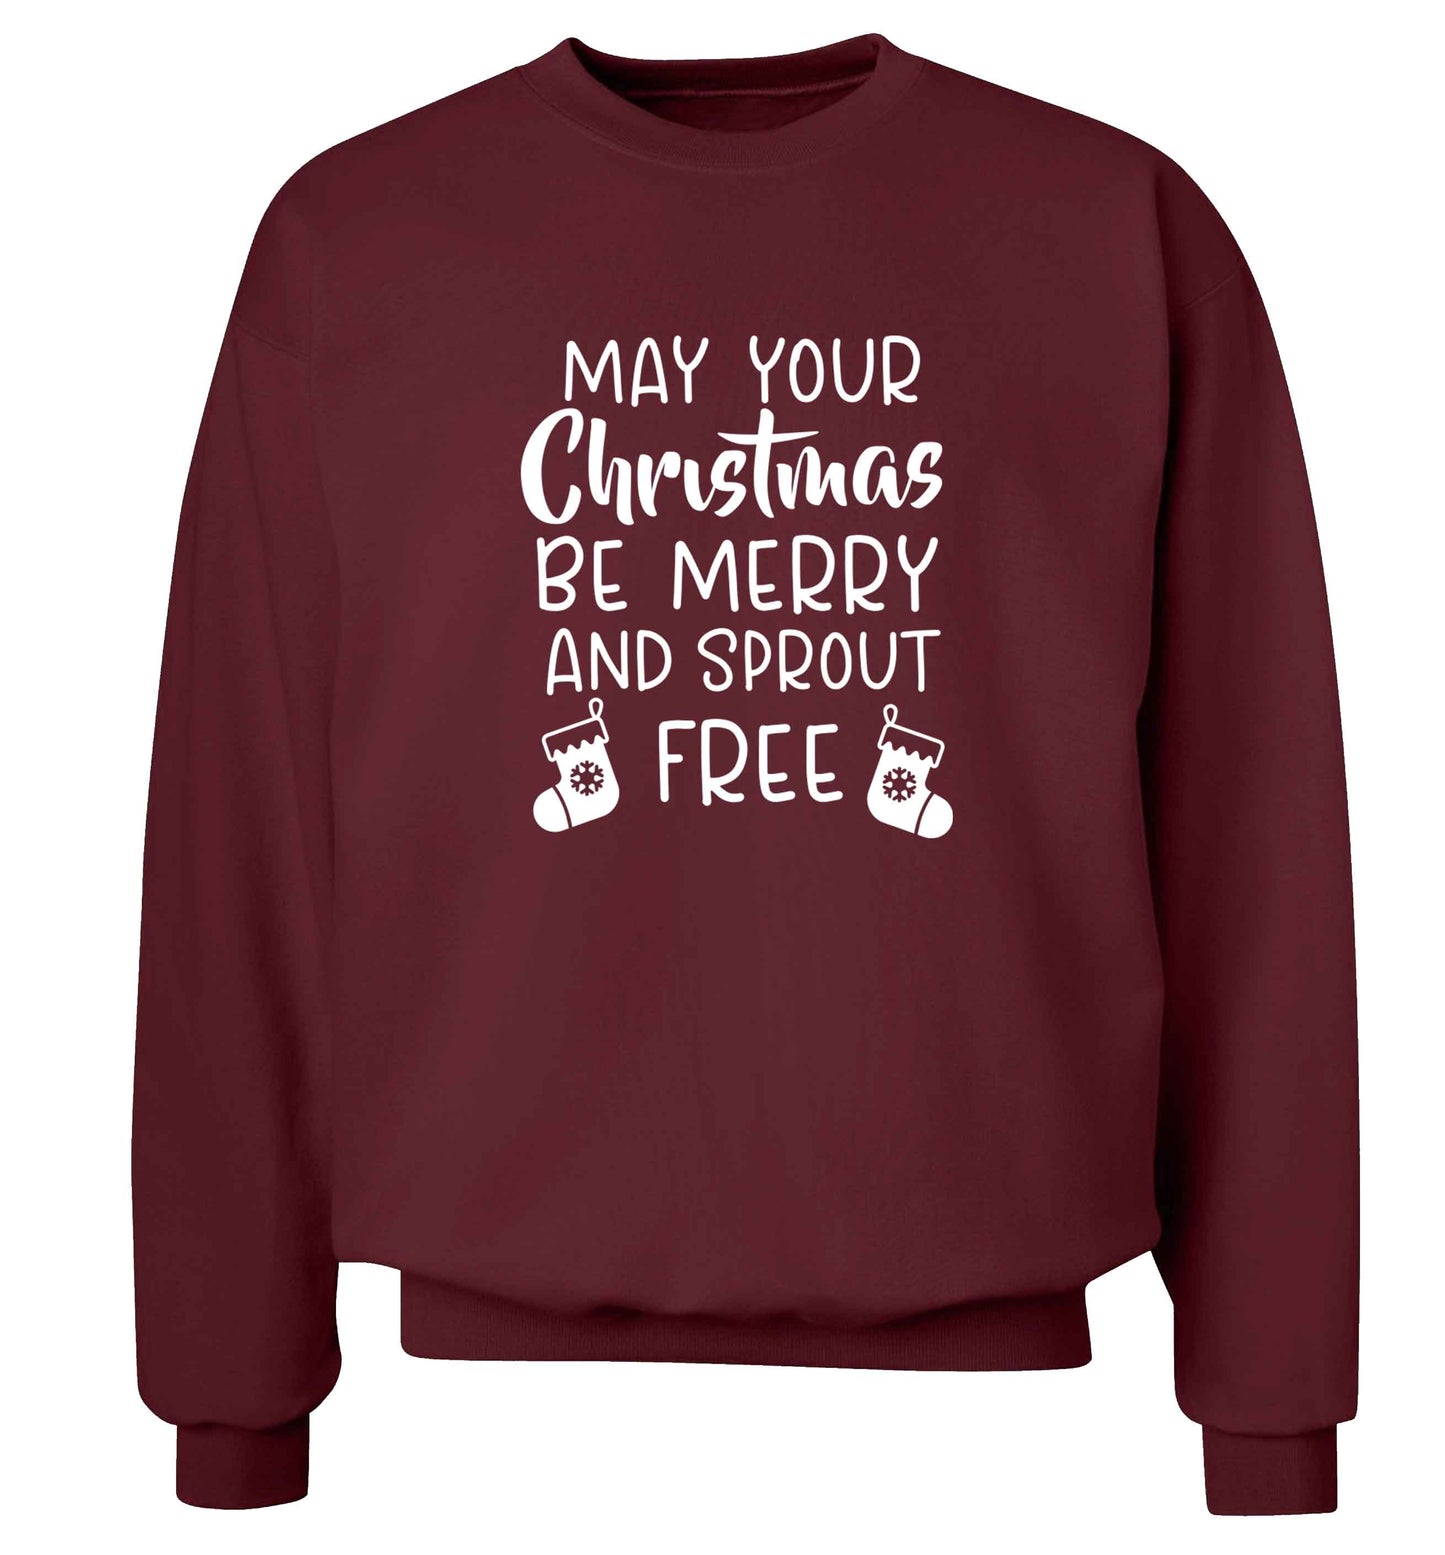 May your Christmas be merry and sprout free adult's unisex maroon sweater 2XL